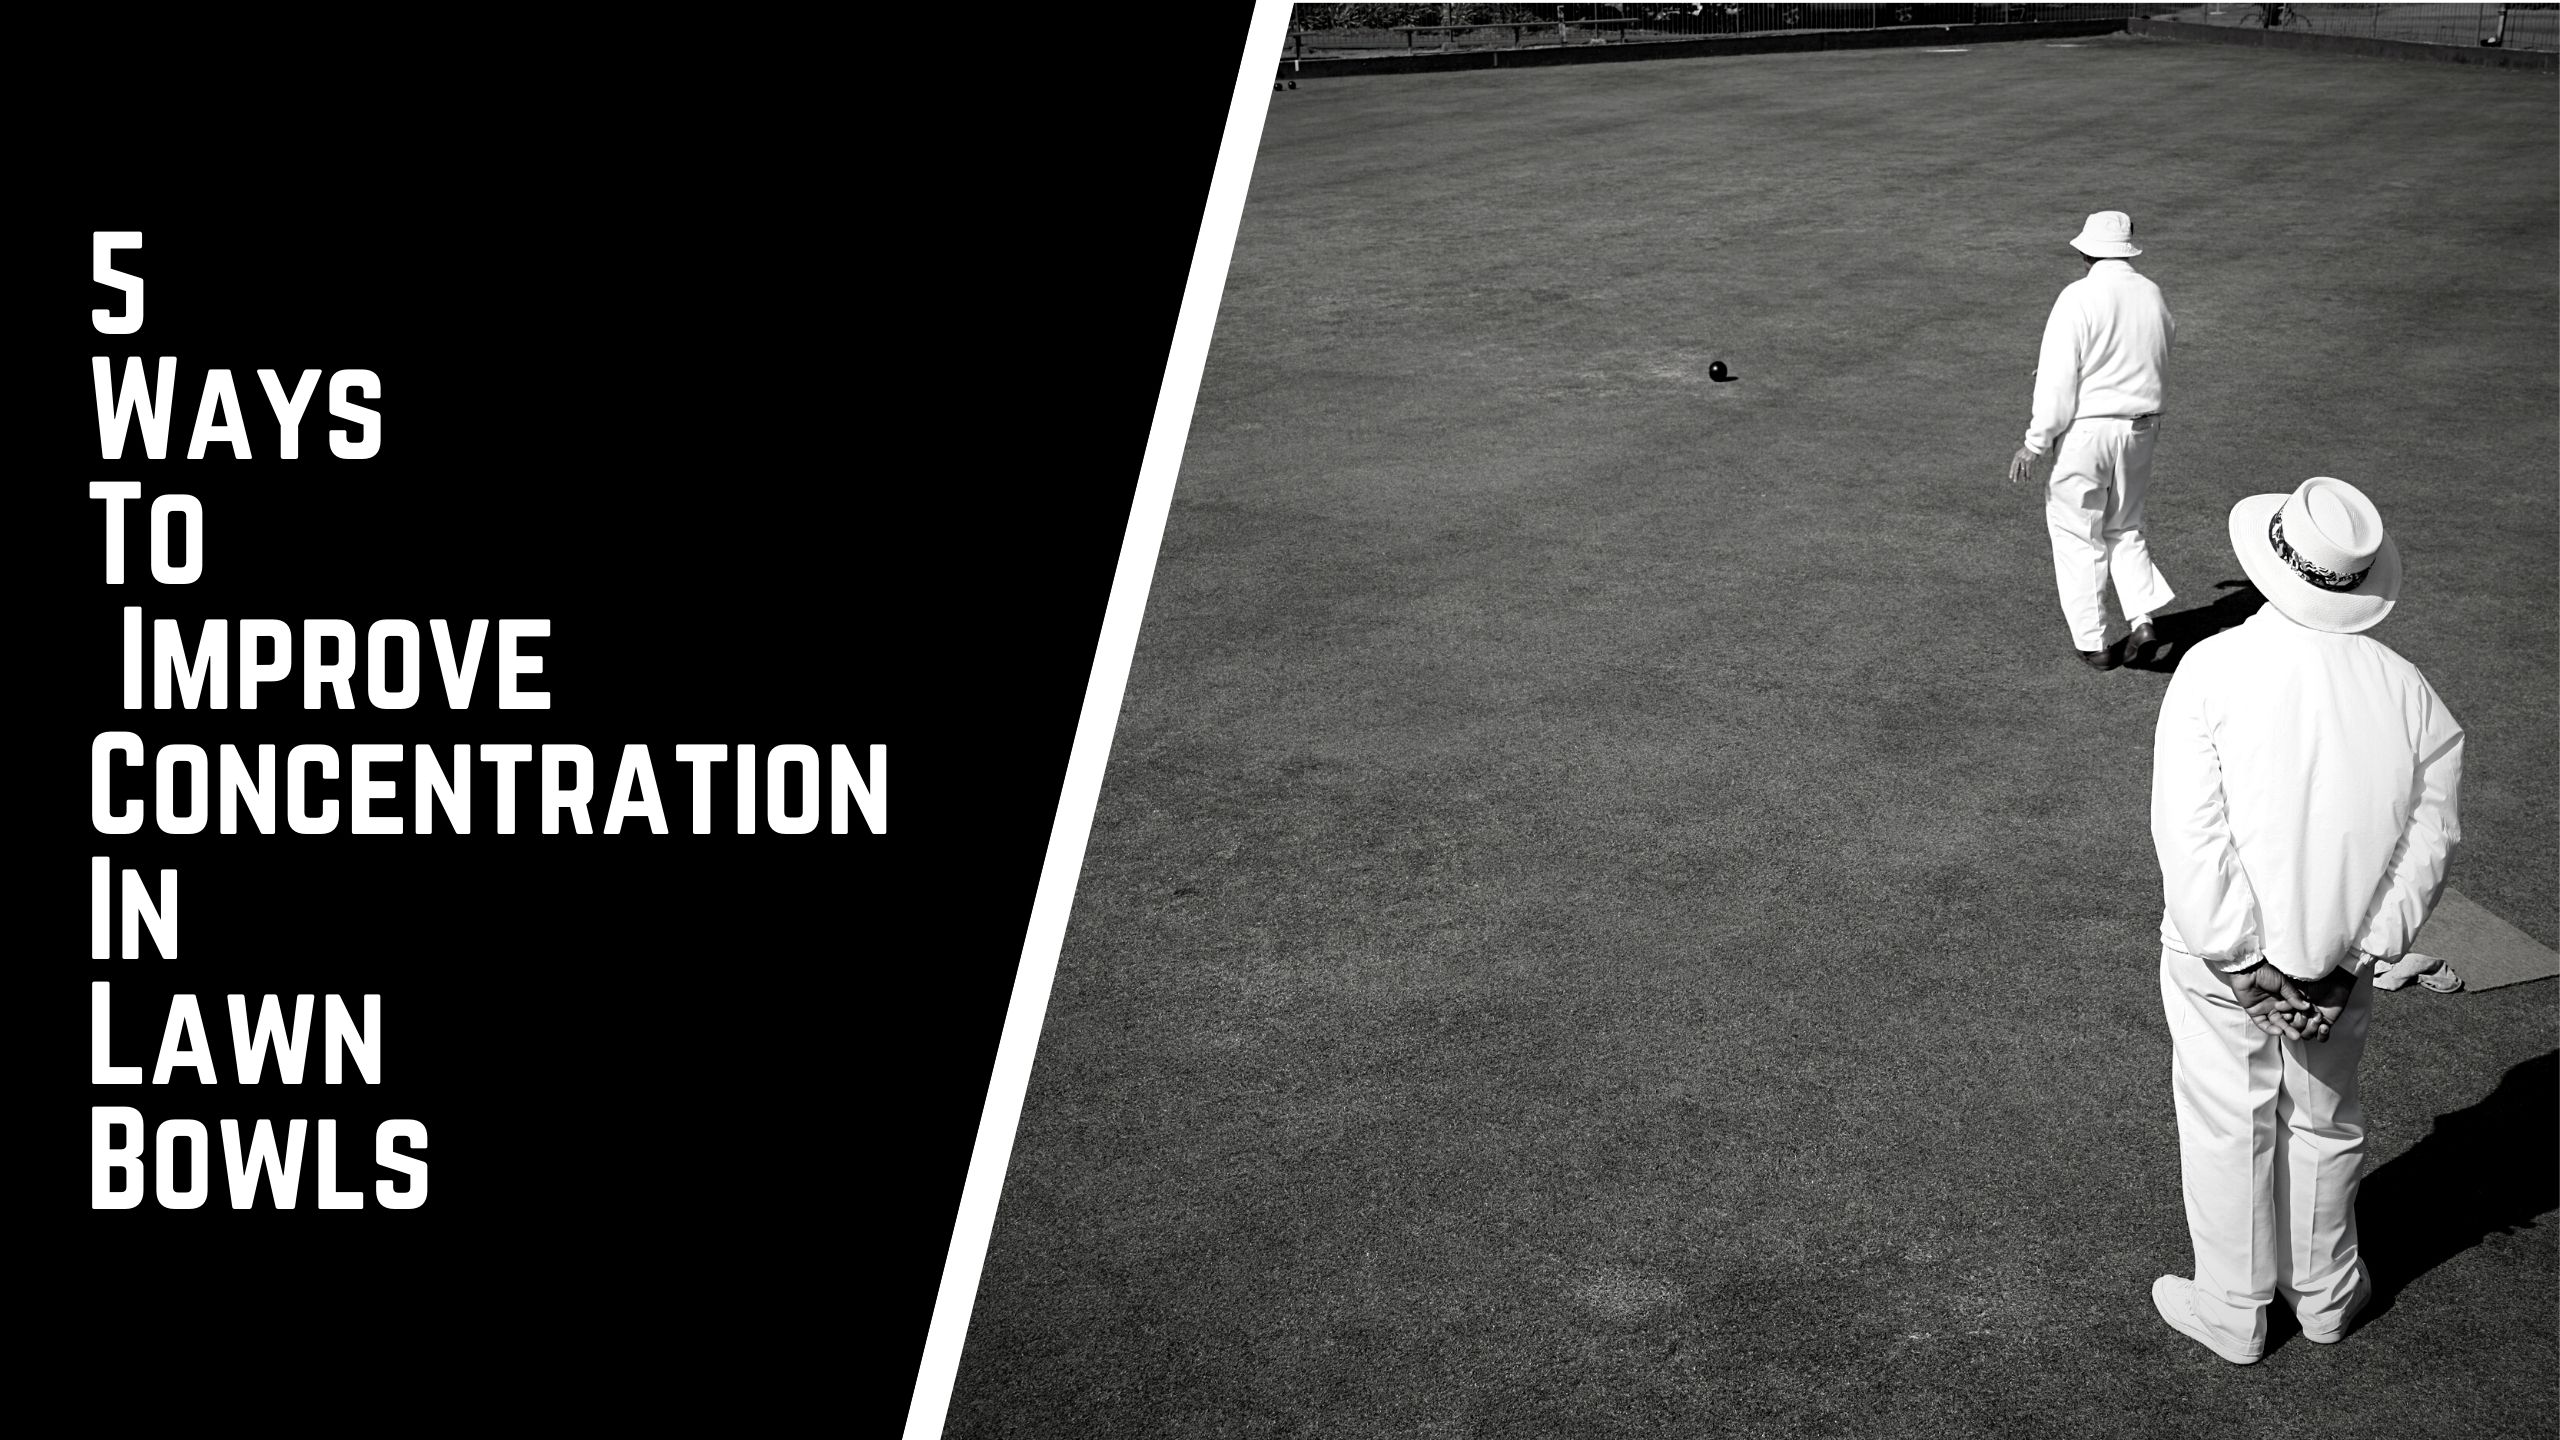 5 Ways To Improve Concentration In Lawn Bowls